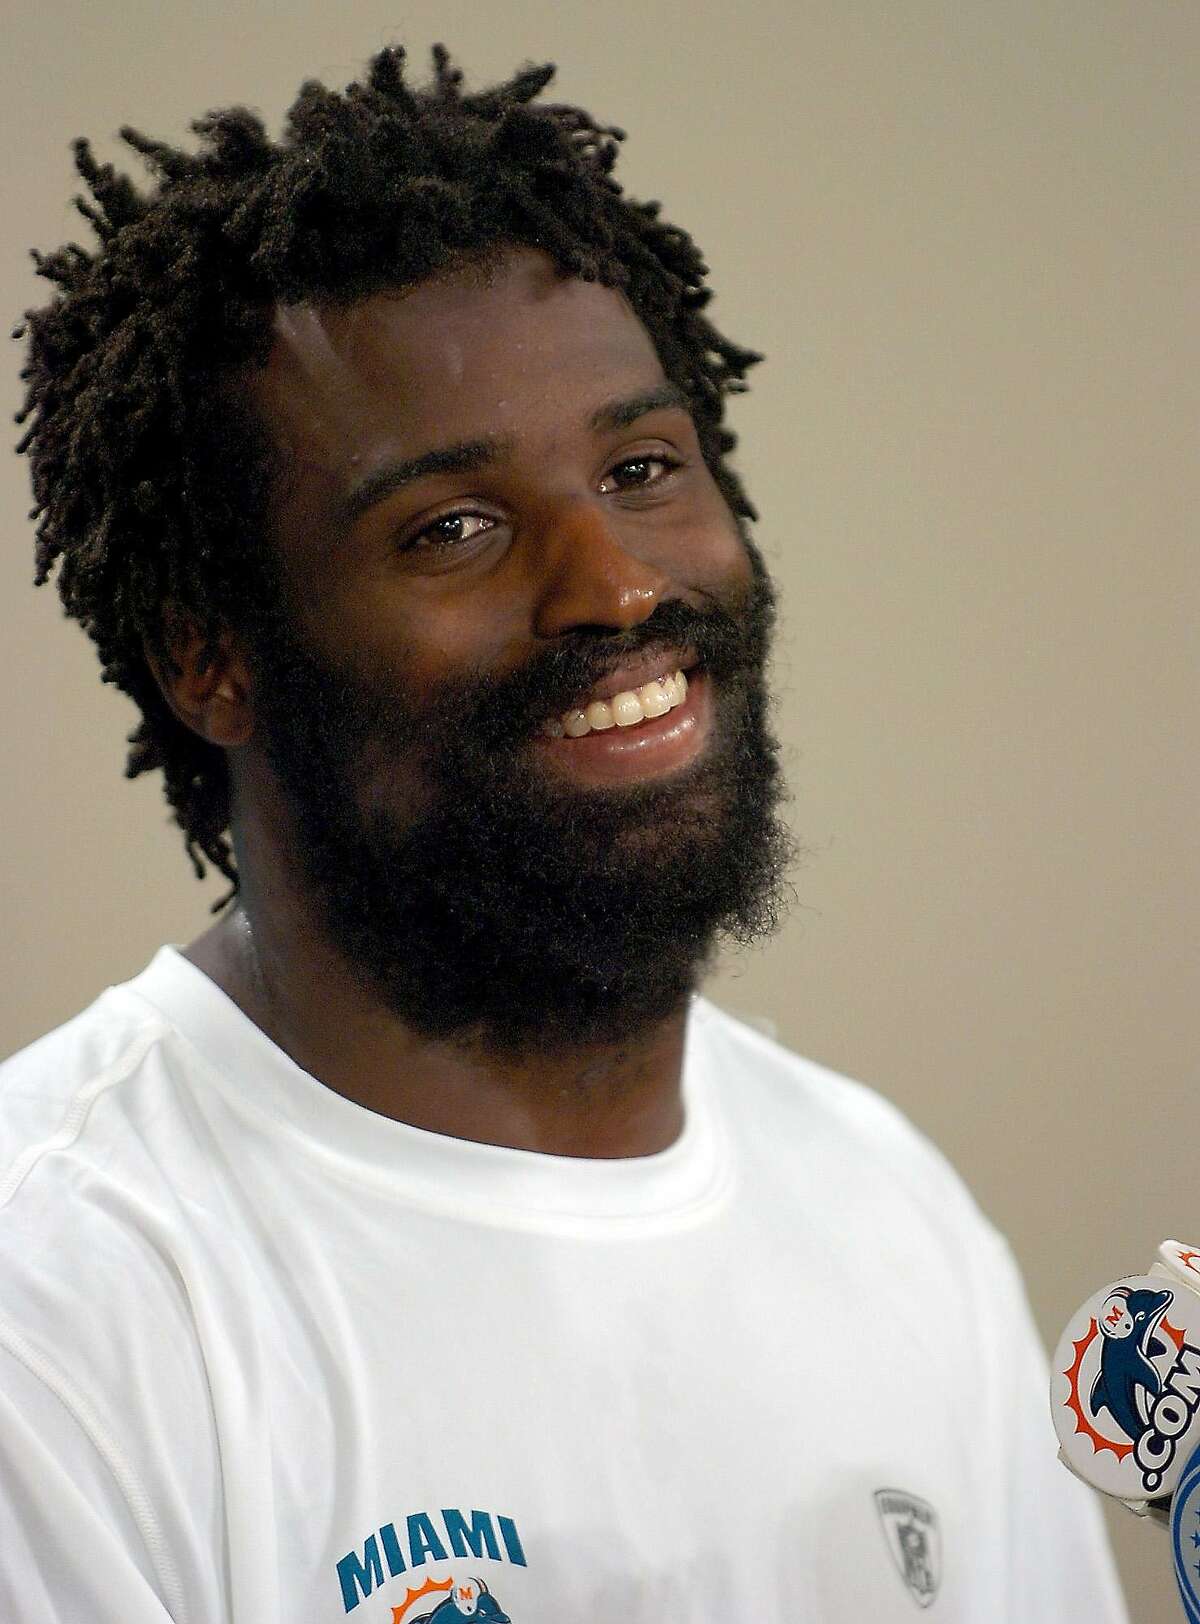 Miami Dolphins runningback Ricky Williams smiles during a news conference in this July 25, 2005 file photo in Davie, Fla. (AP Photo/Steve Mitchell)